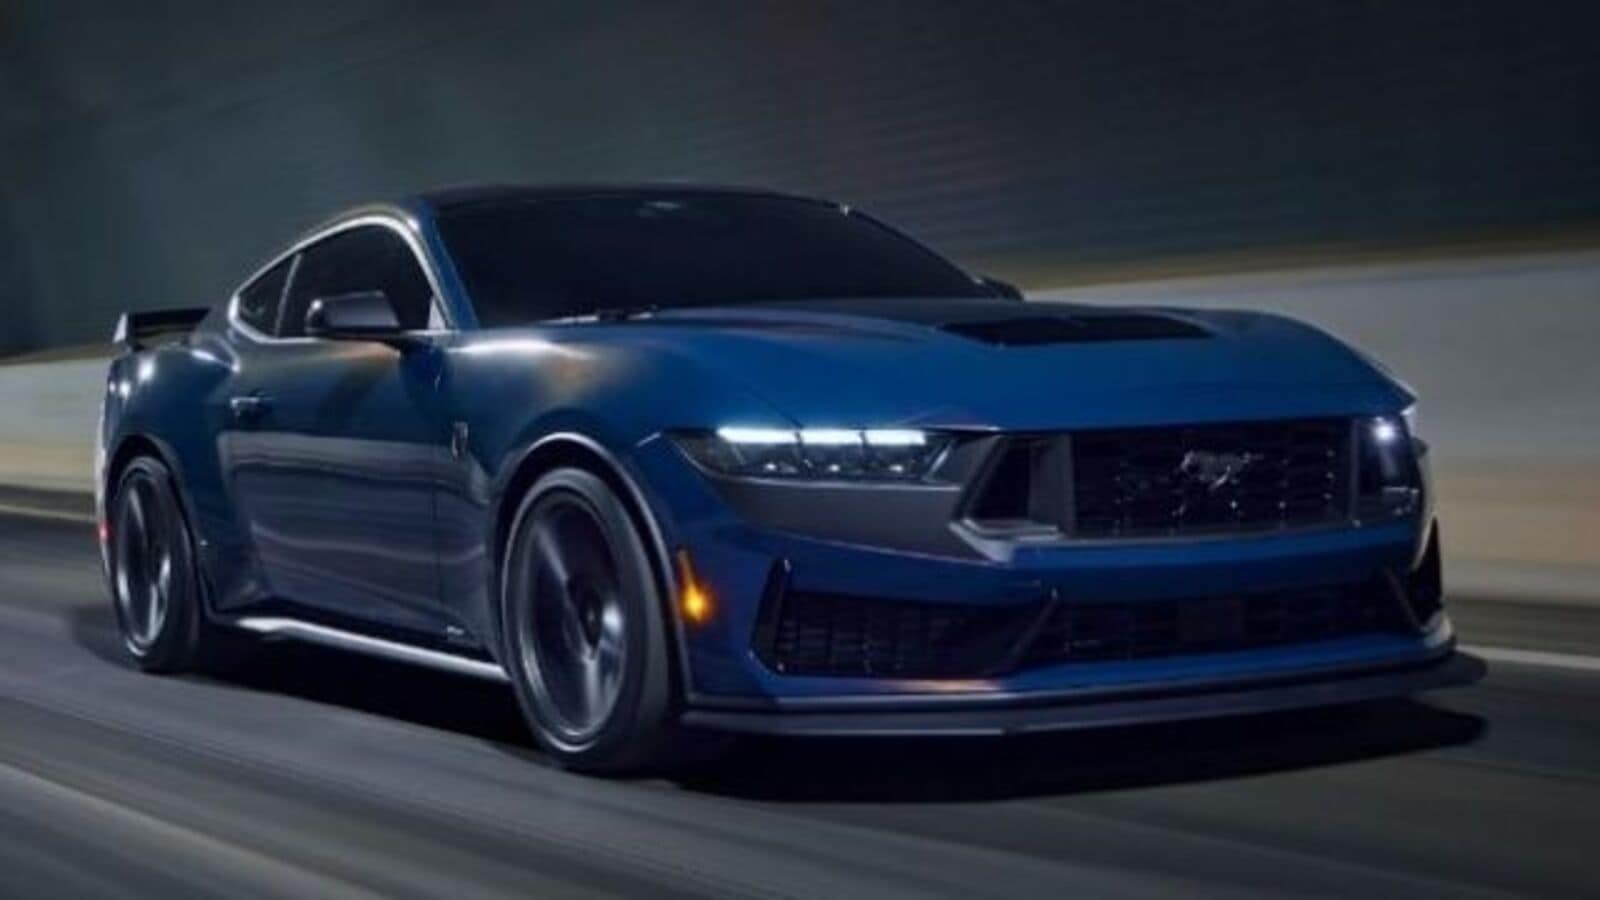 Ford expands Mustang lineup with sinisterlooking Dark Horse model